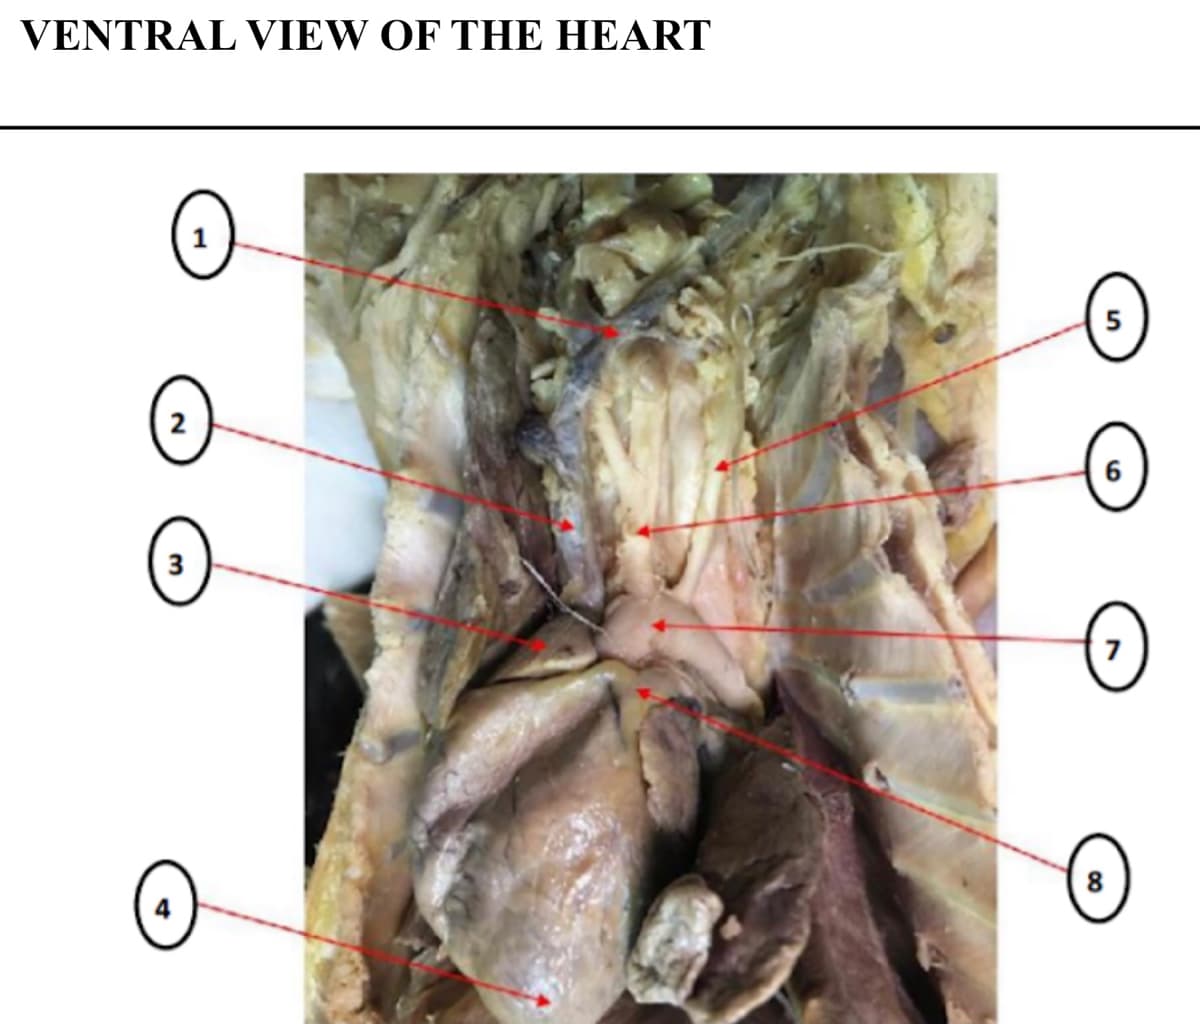 VENTRAL VIEW OF THE HEART
5
2
3
